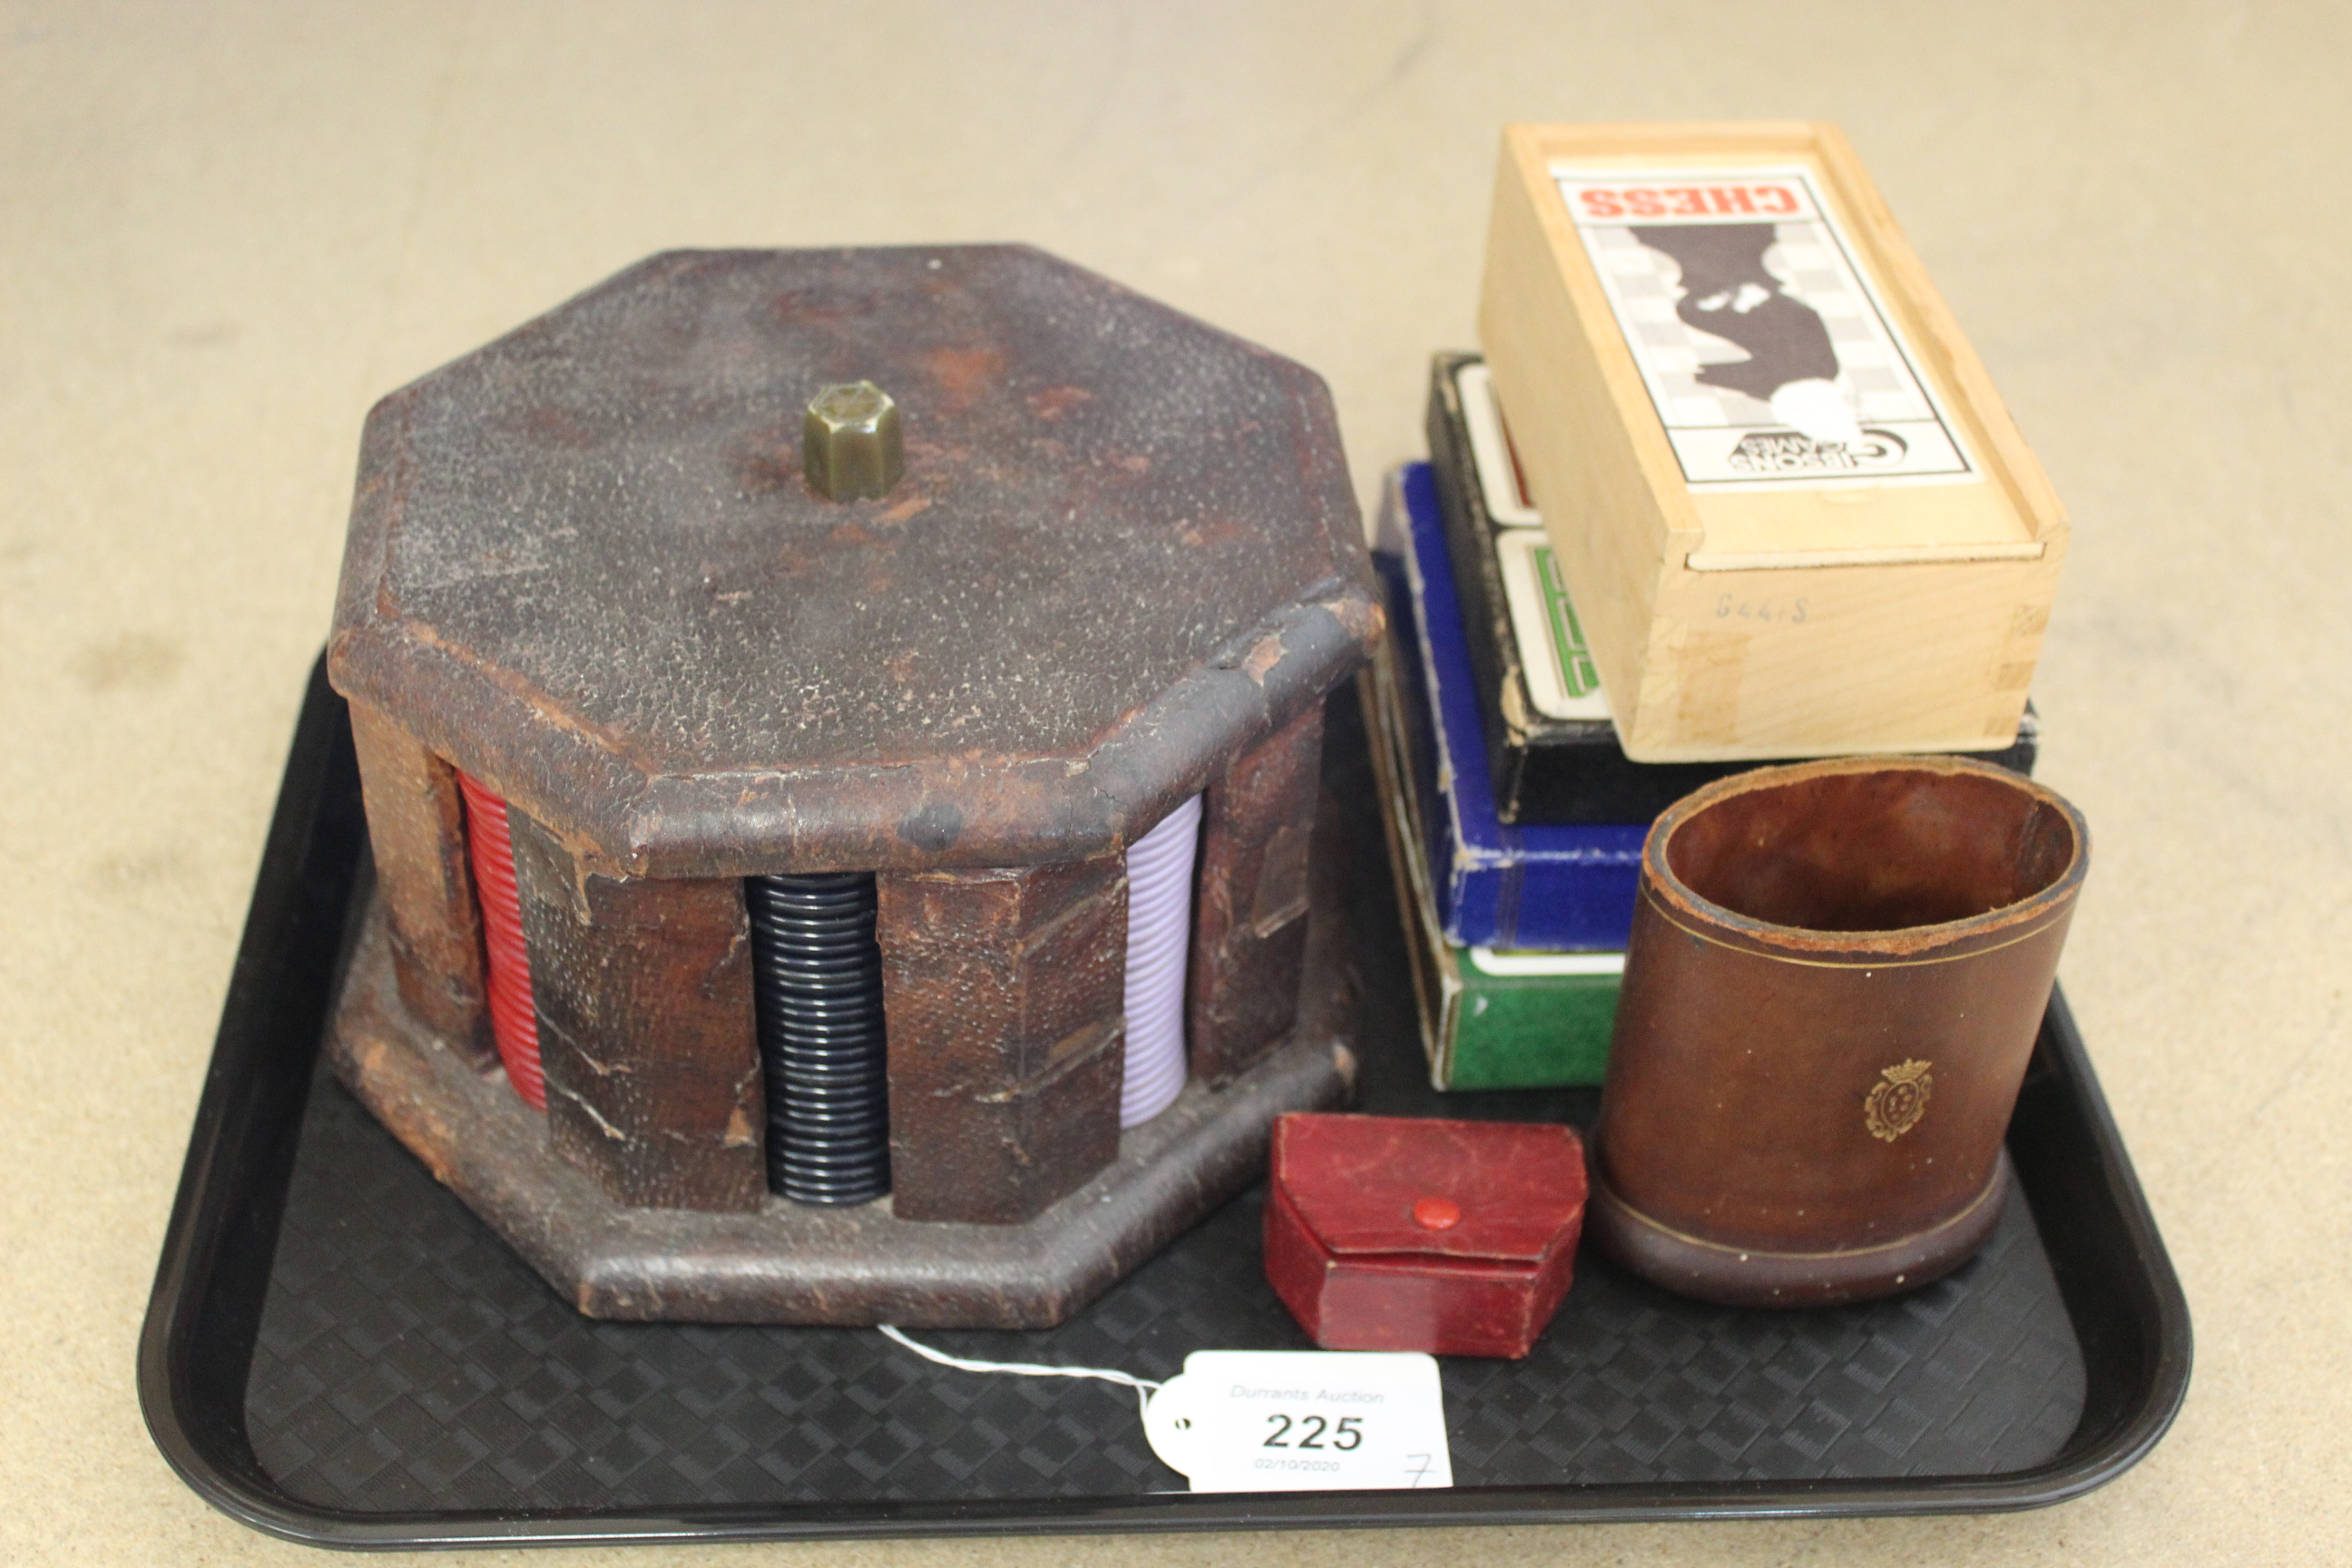 Three double sets of vintage playing cards, a games chip dispenser, leather dice shaker,